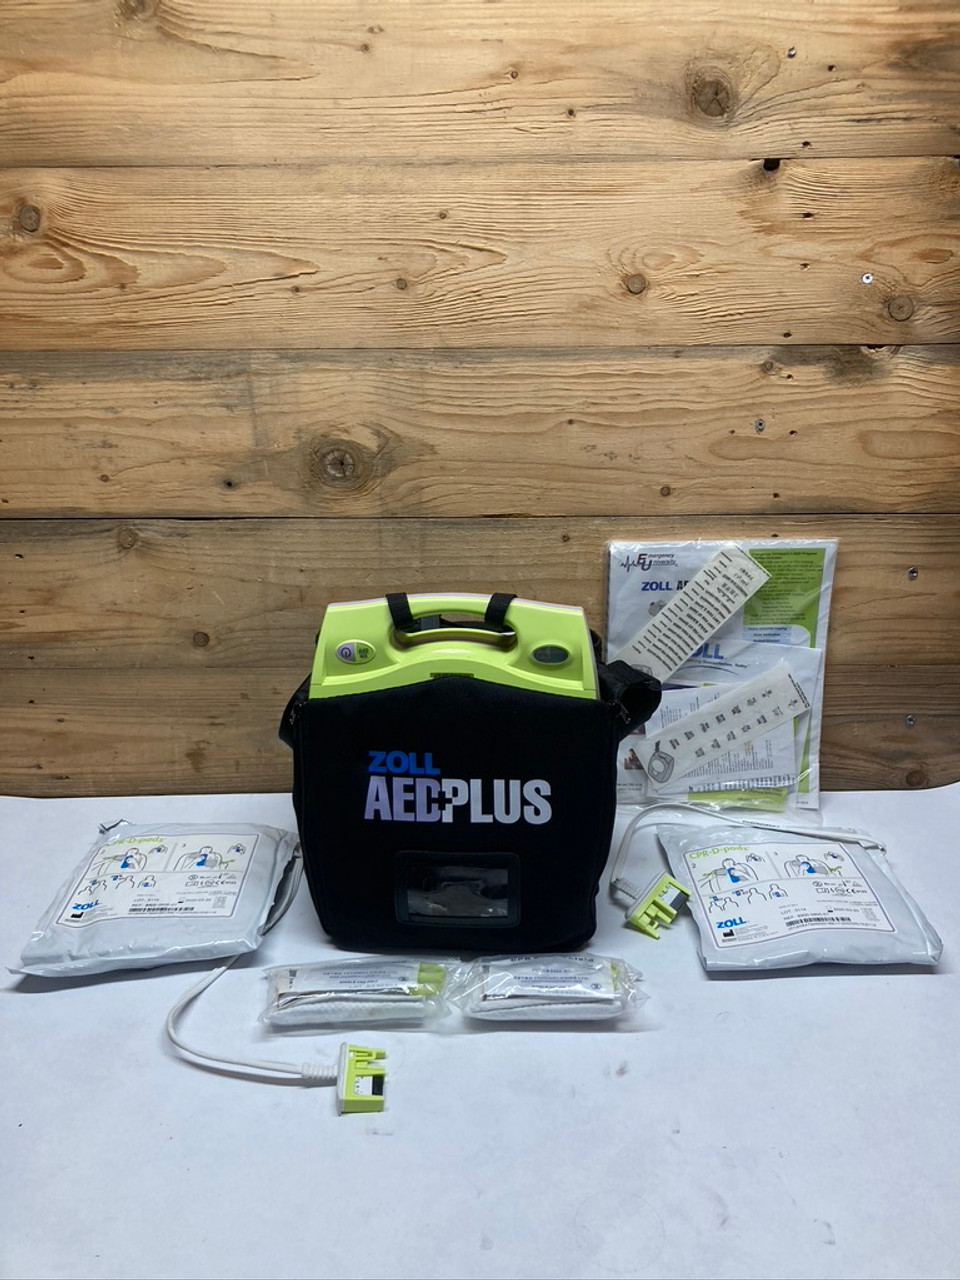 Zoll AED Plus Defibrillator with Accessories